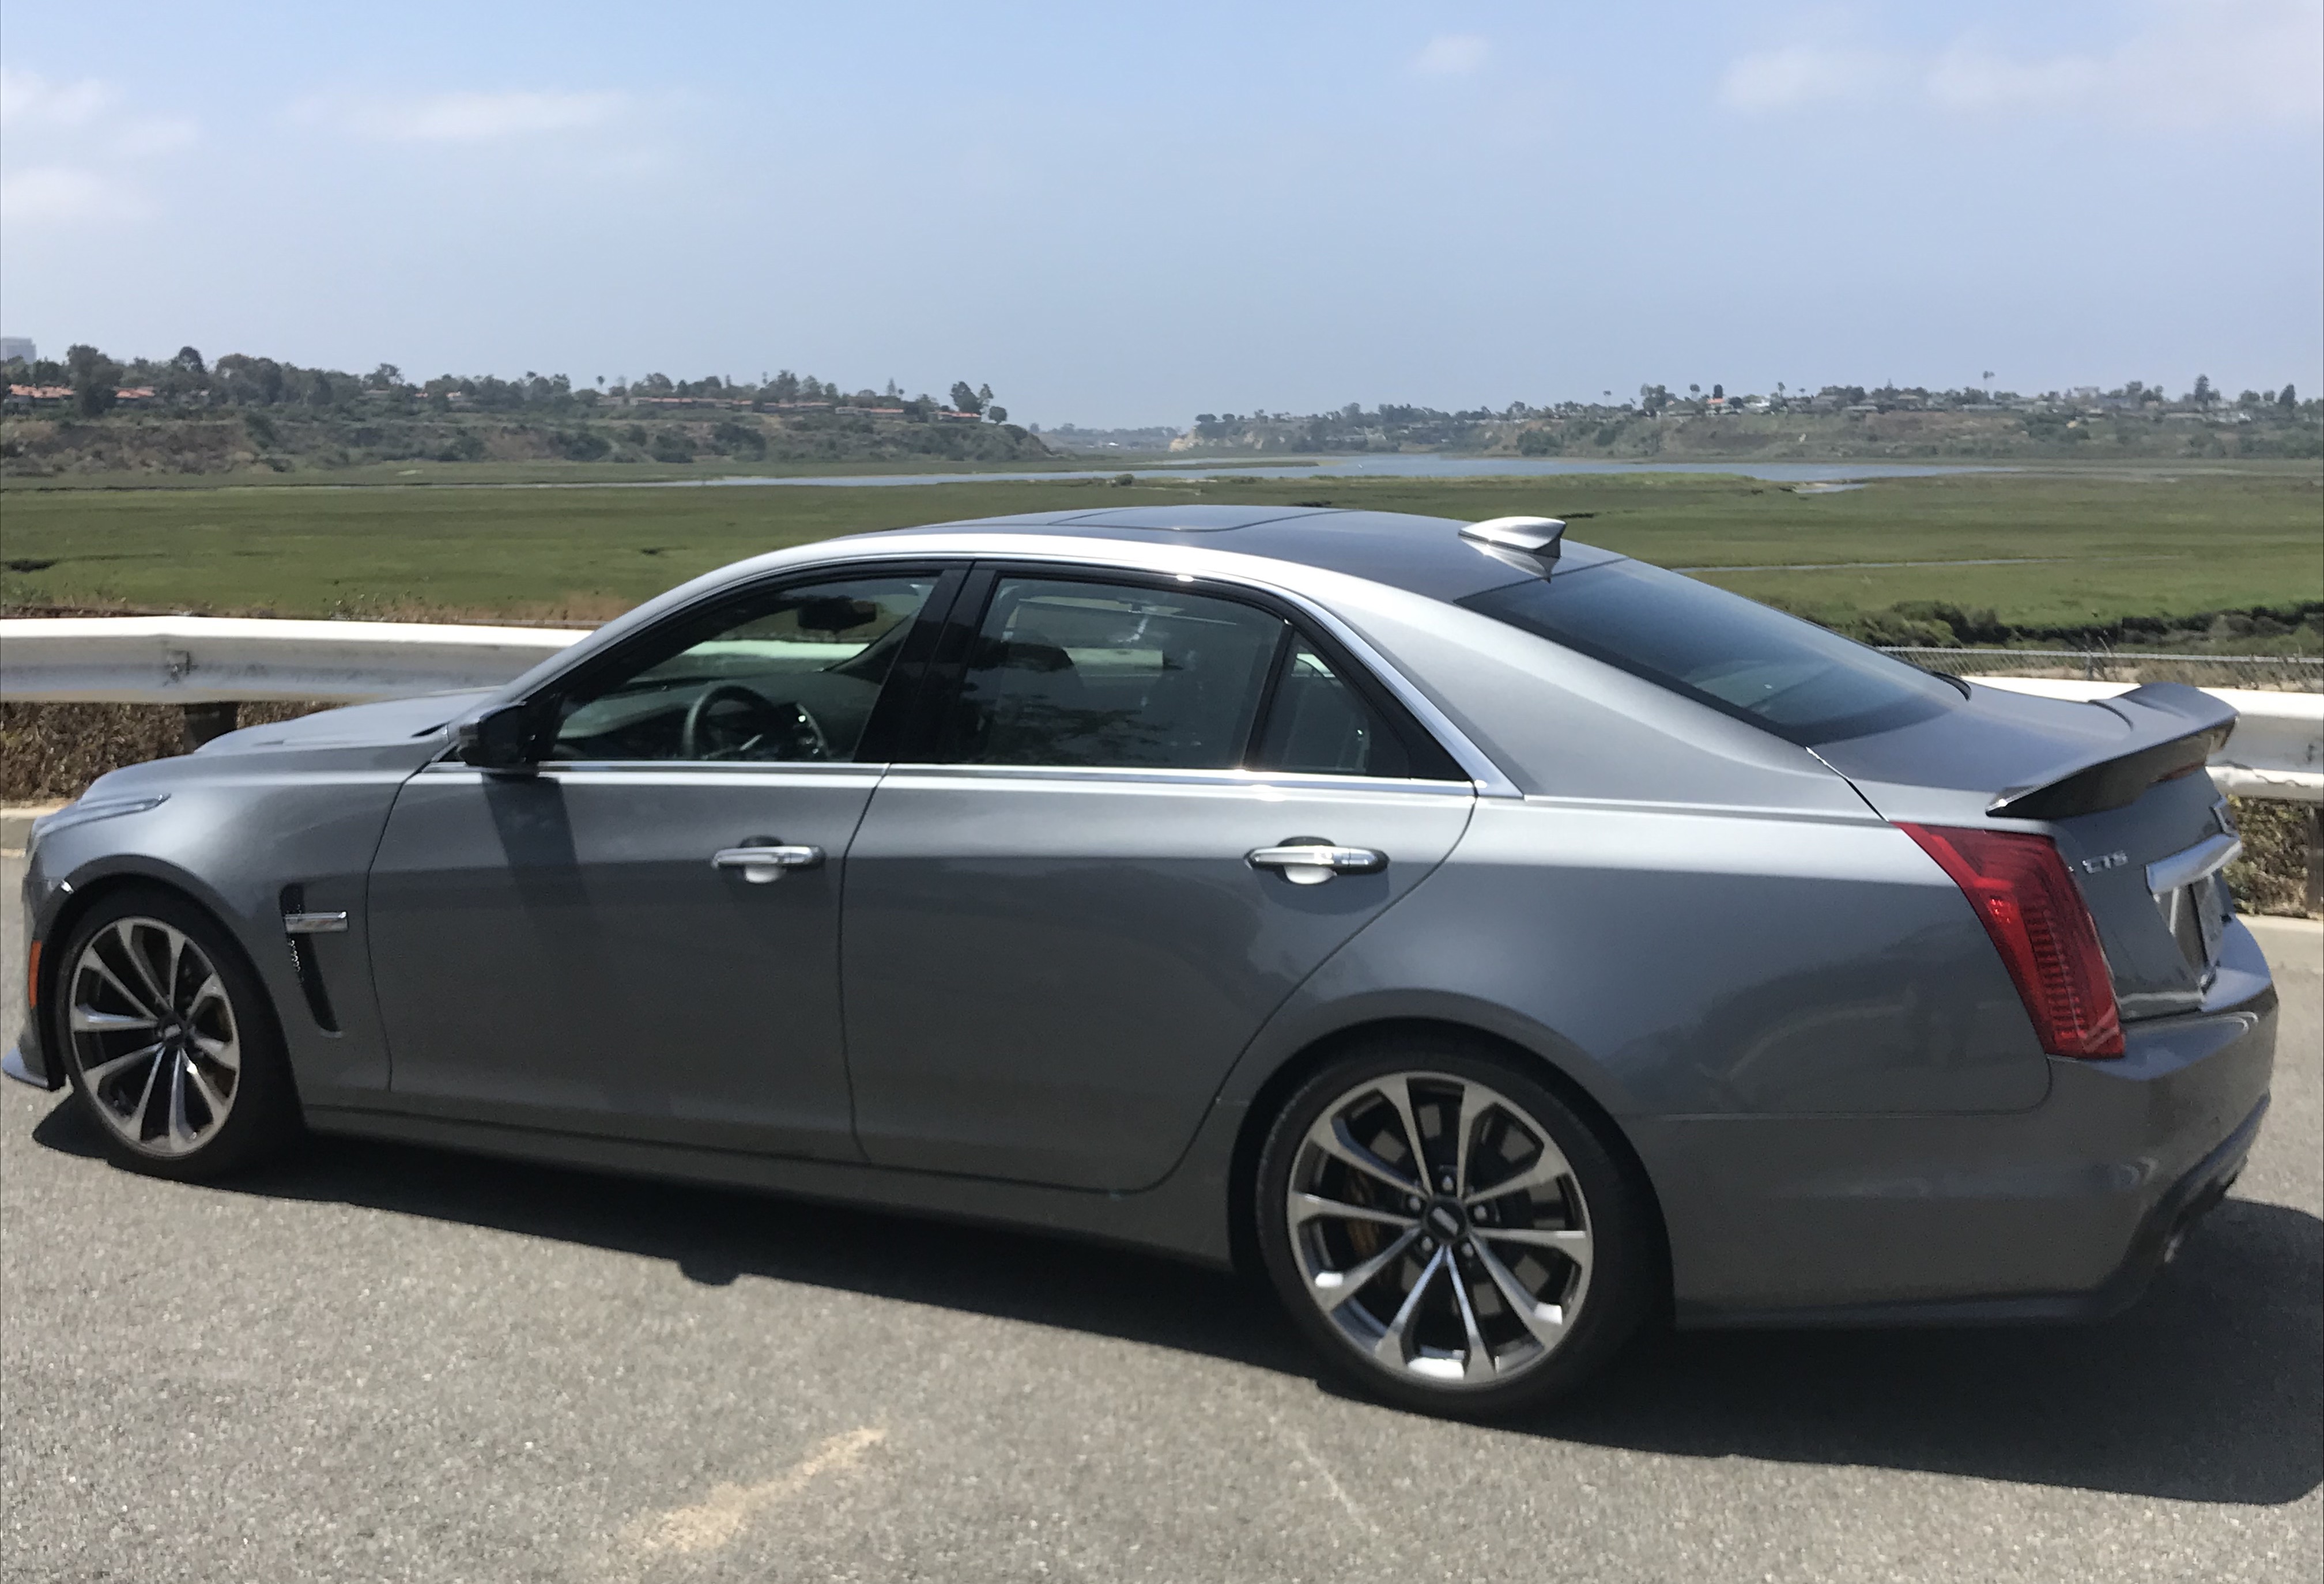 Shifting into Beast Mode in a 2019 Cadillac CTS V-Series Sedan – OC Weekly